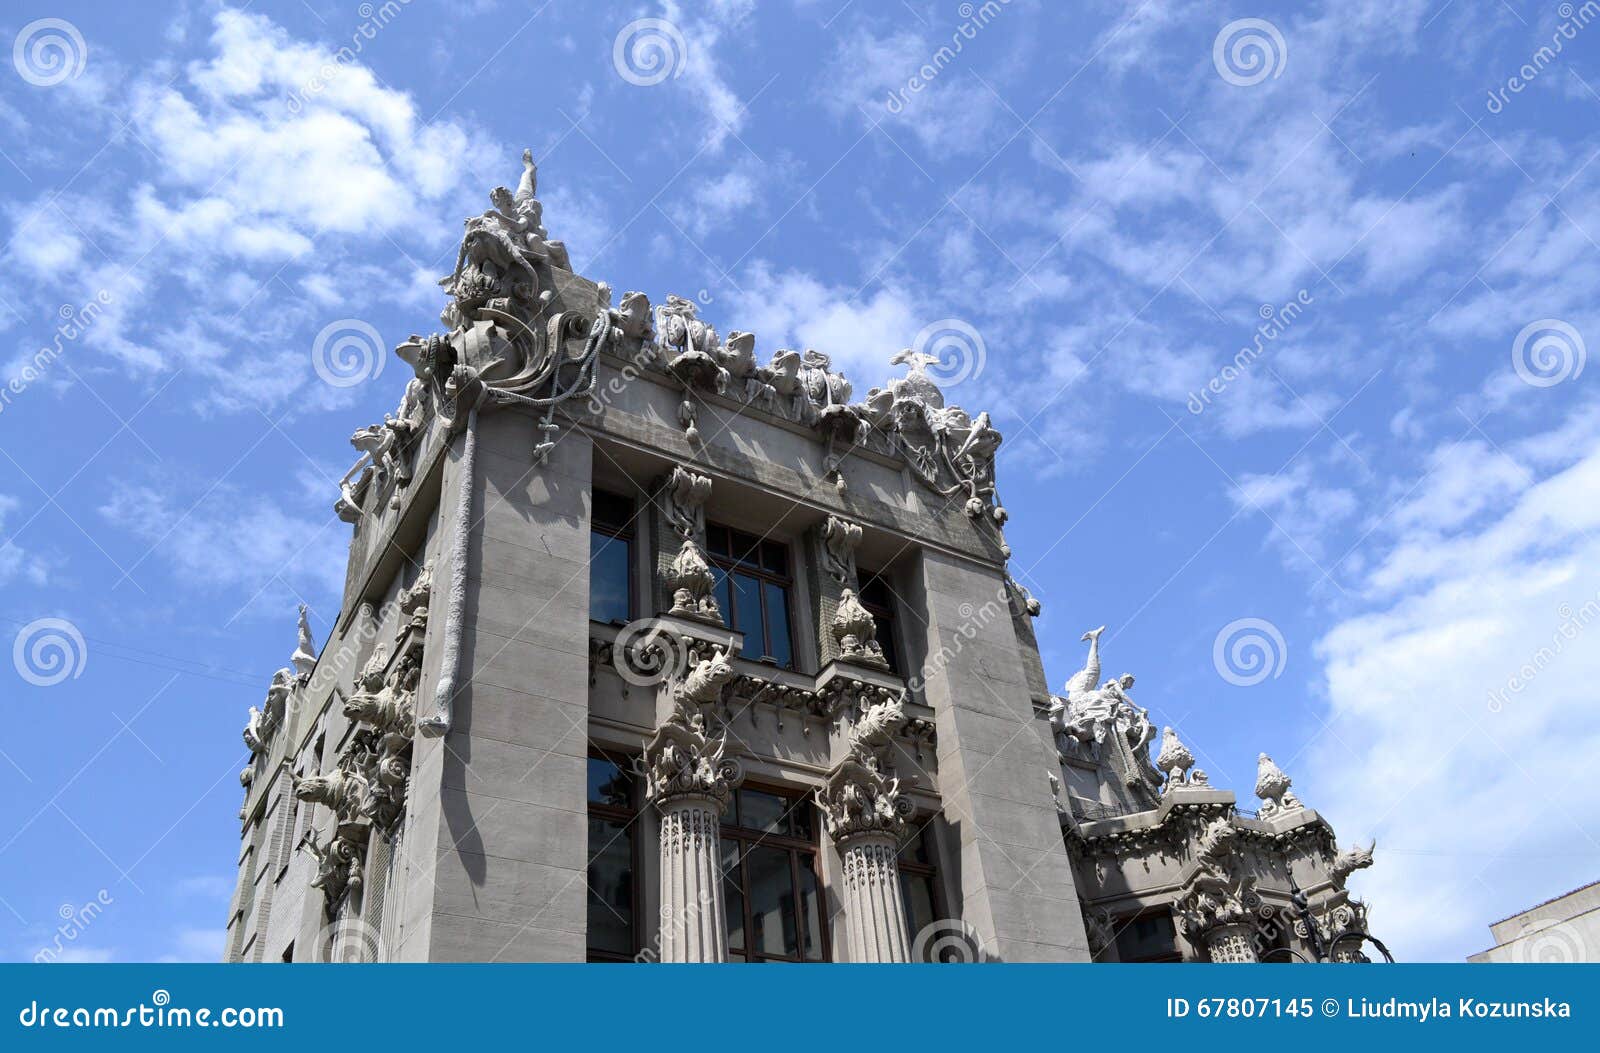 House with Chimeras stock image. Image of animals, building - 67807145